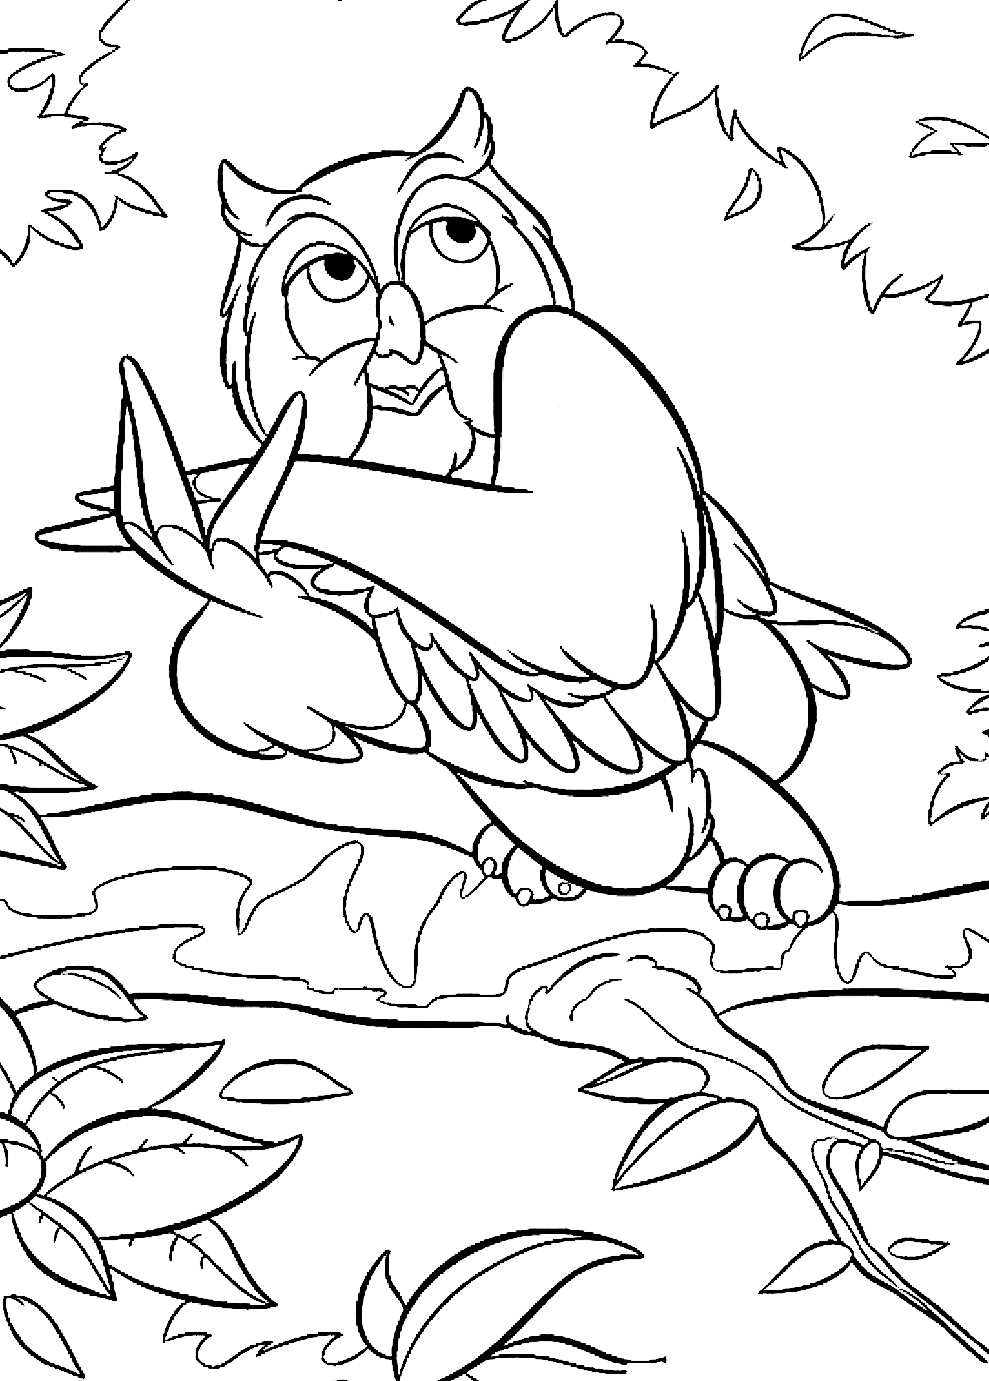 Owl To Print Coloring Pages